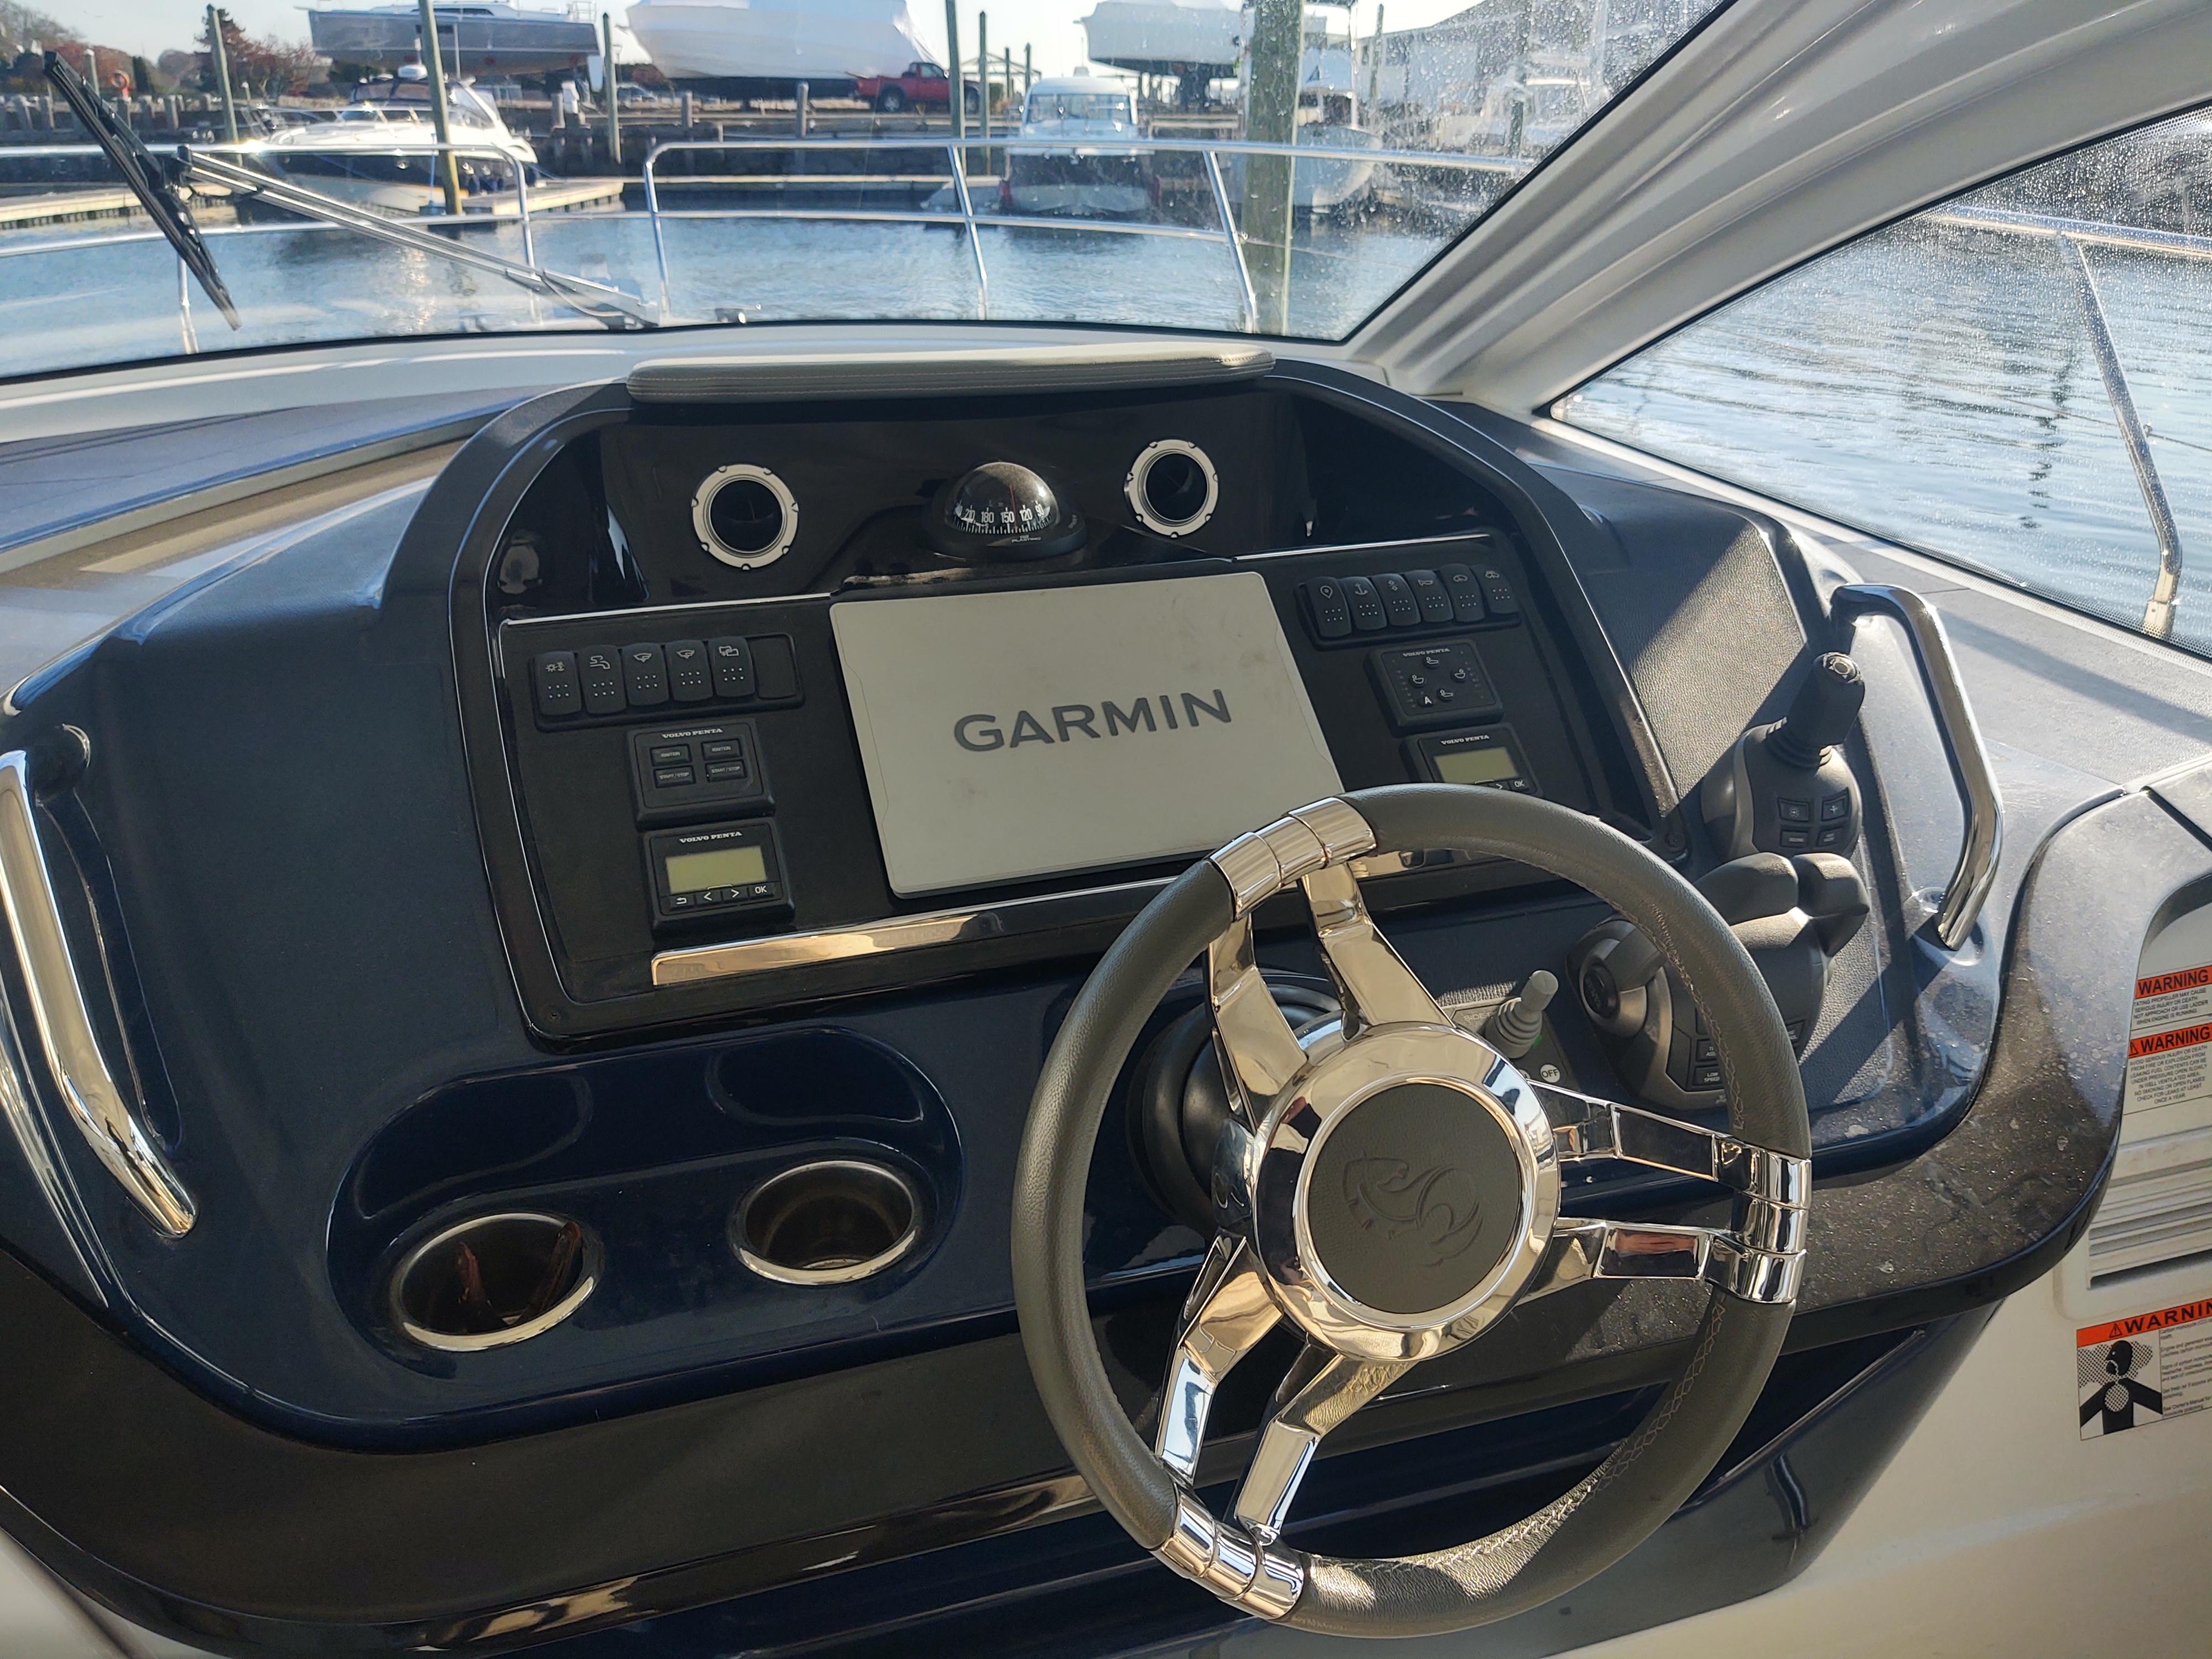 GT 41 Helm console